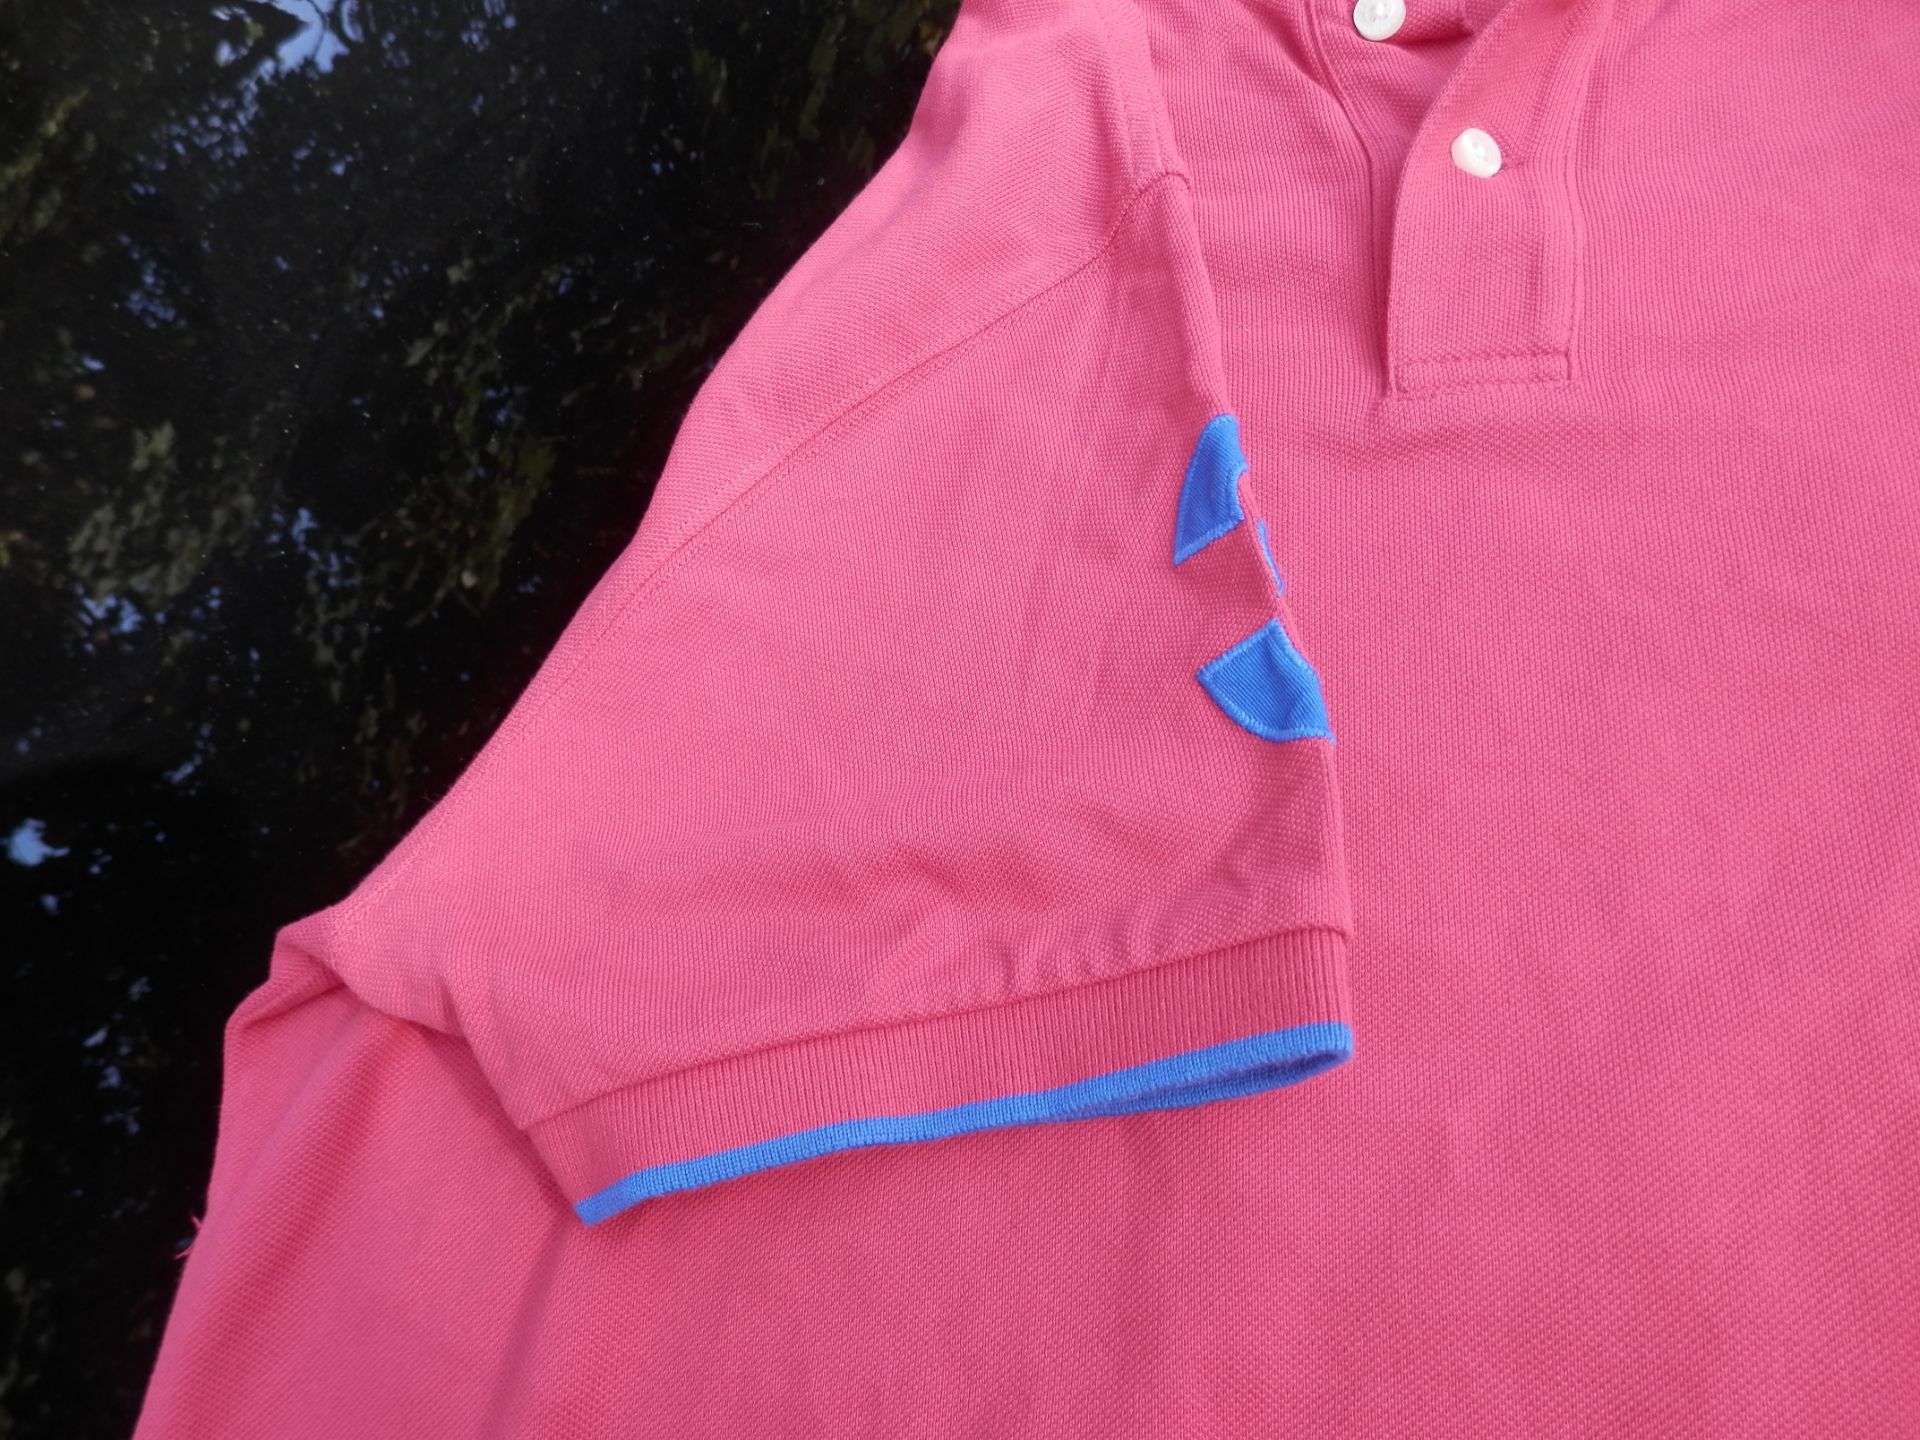 GENTS USED HACKETT POLO SHIRT IN XL, GOOD USED CONDITION. - Image 4 of 8